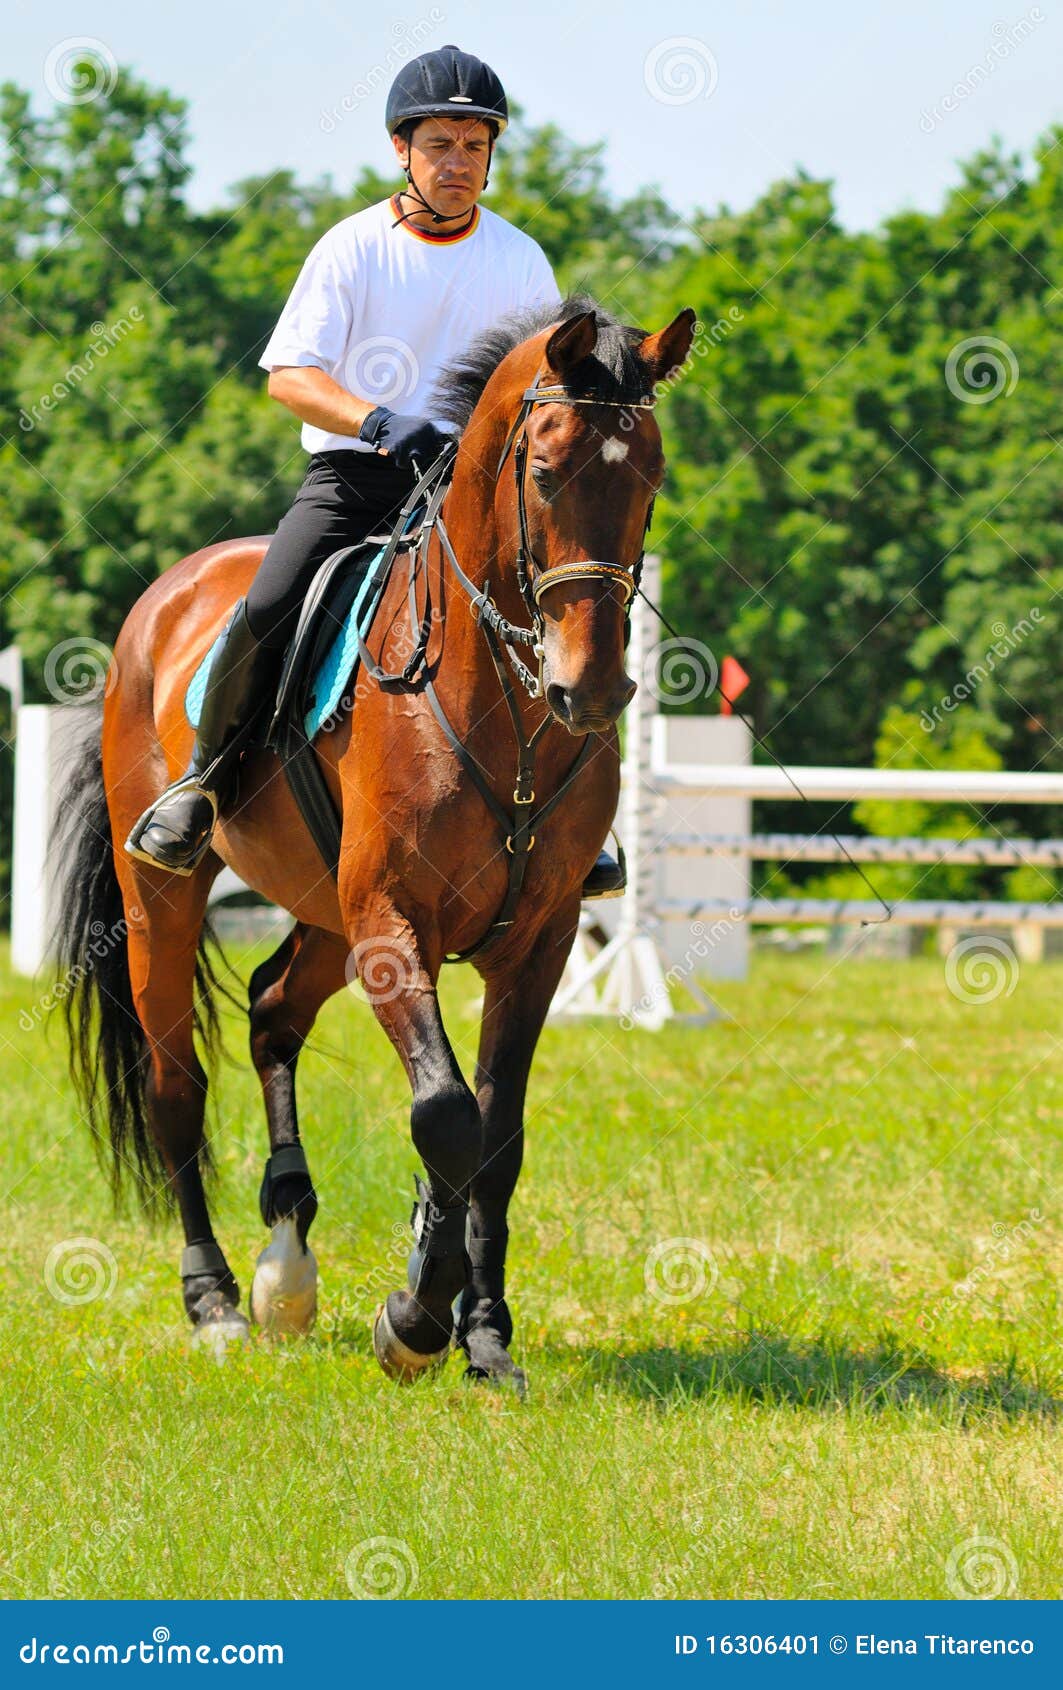 rider on bay sportive horse